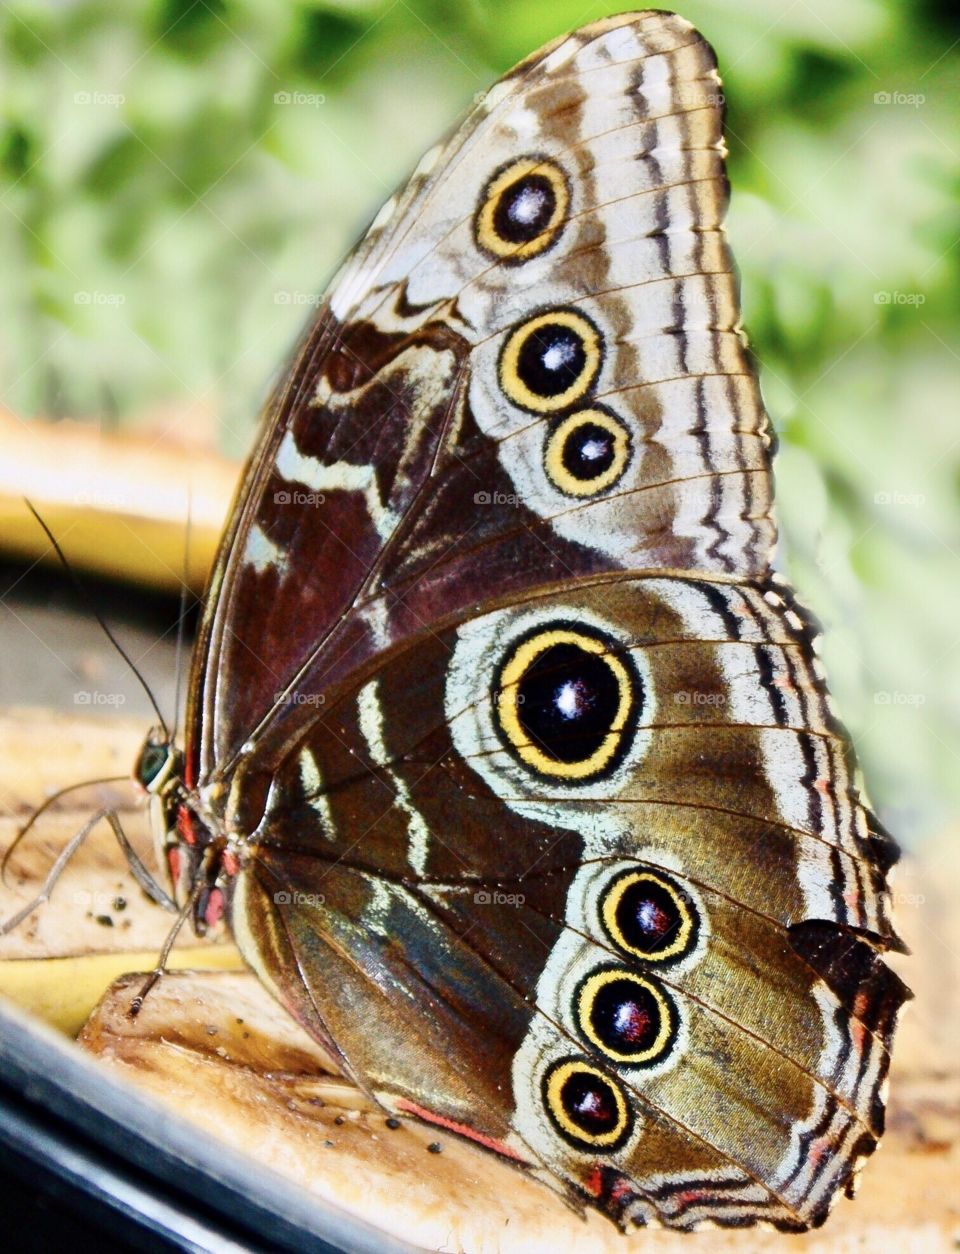 Butterfly closeup - beautiful round patterns on wings 